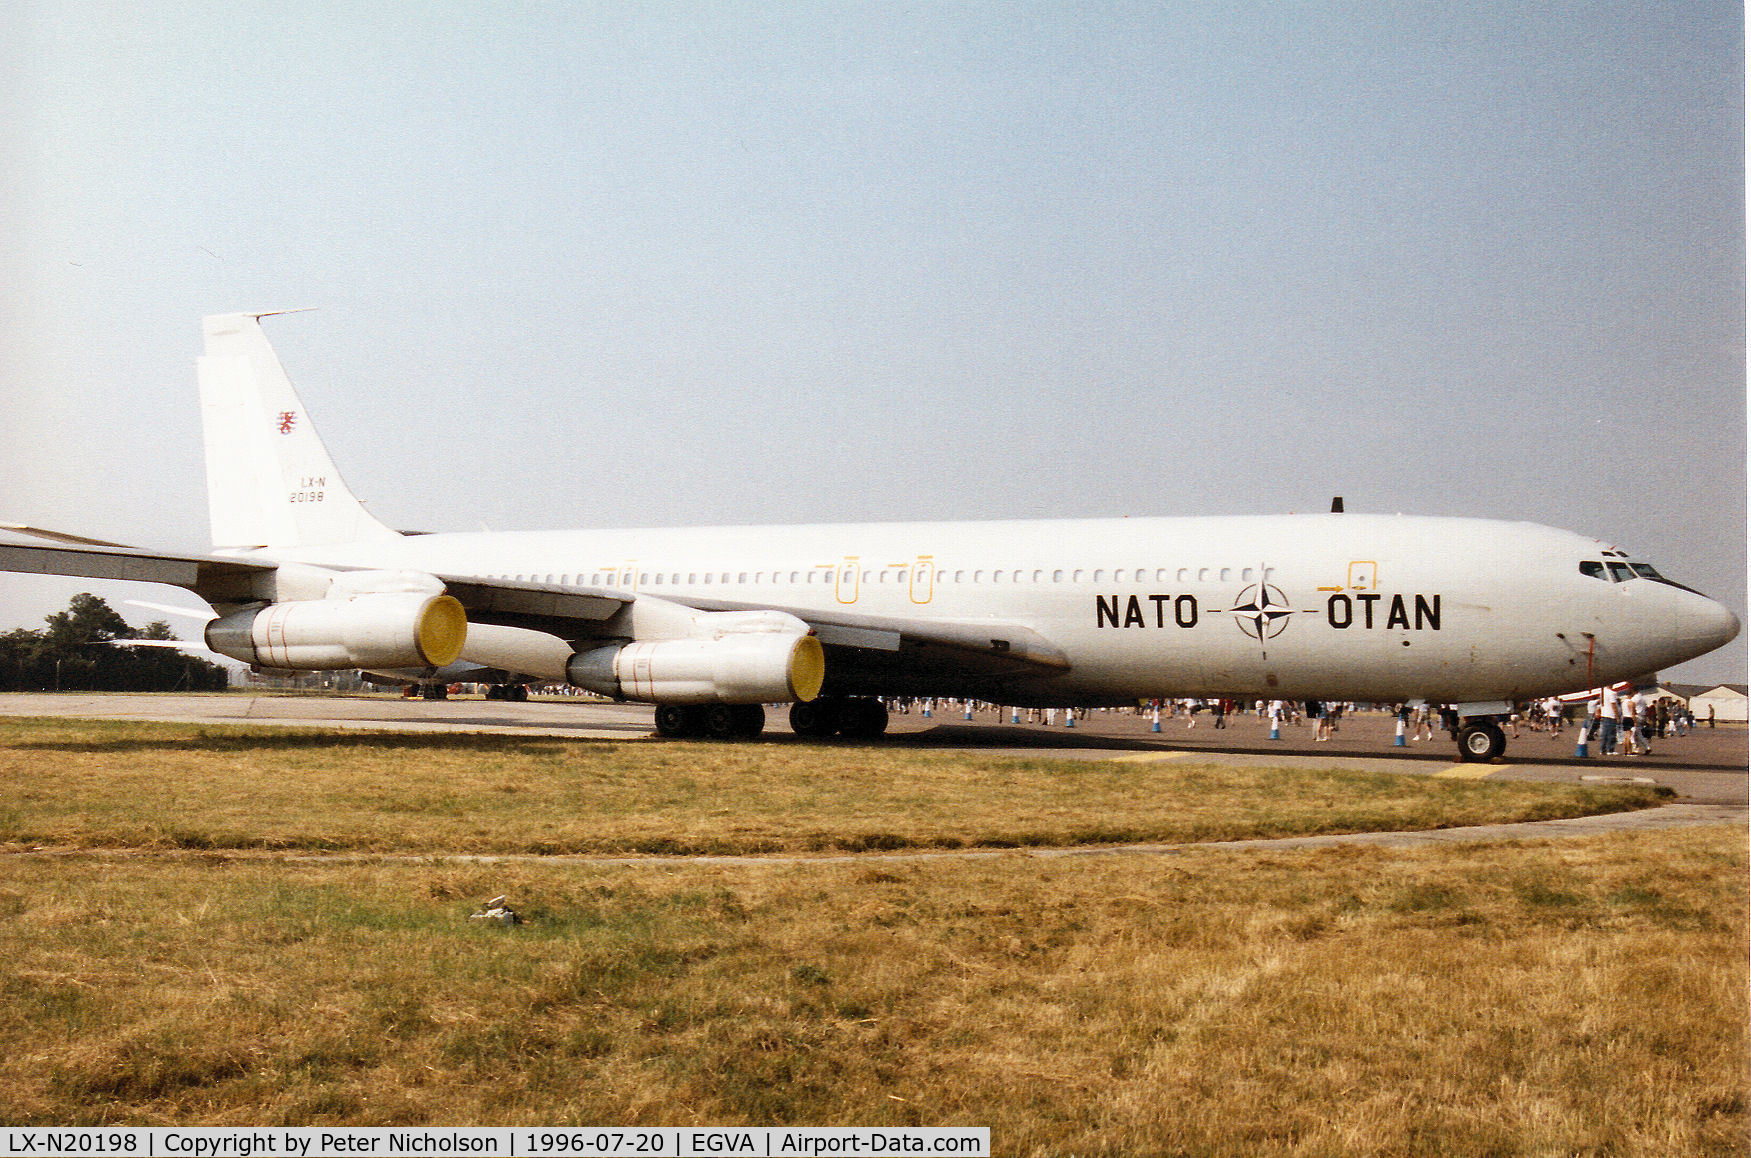 LX-N20198, 1969 Boeing 707-329C(TCA) C/N 20198, Boeing 707-329C of the NATO Airborne Early Warning Force on display at the 1996 Royal Intnl Air Tattoo at RAF Fairford.